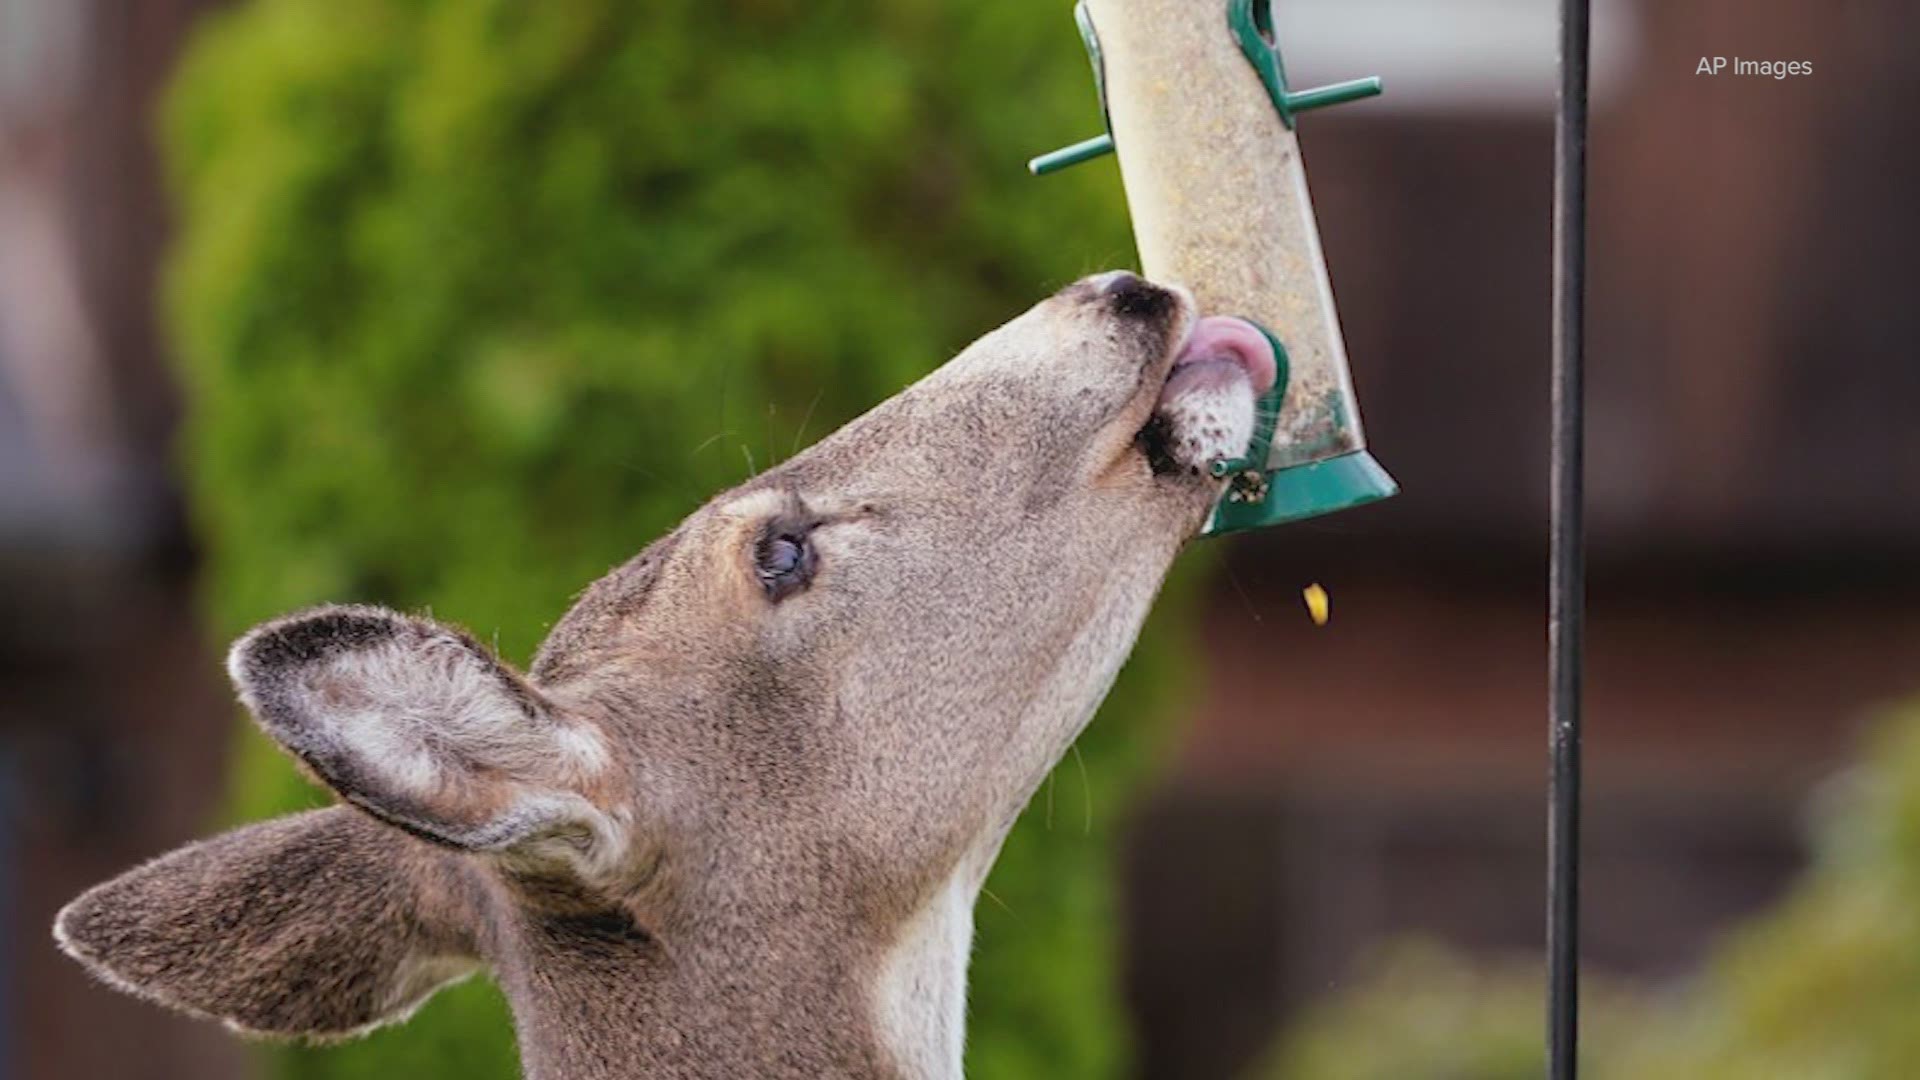 Deer found foaming and frothing at the mouth have officials pointing to a virus, though it poses no threat to humans.